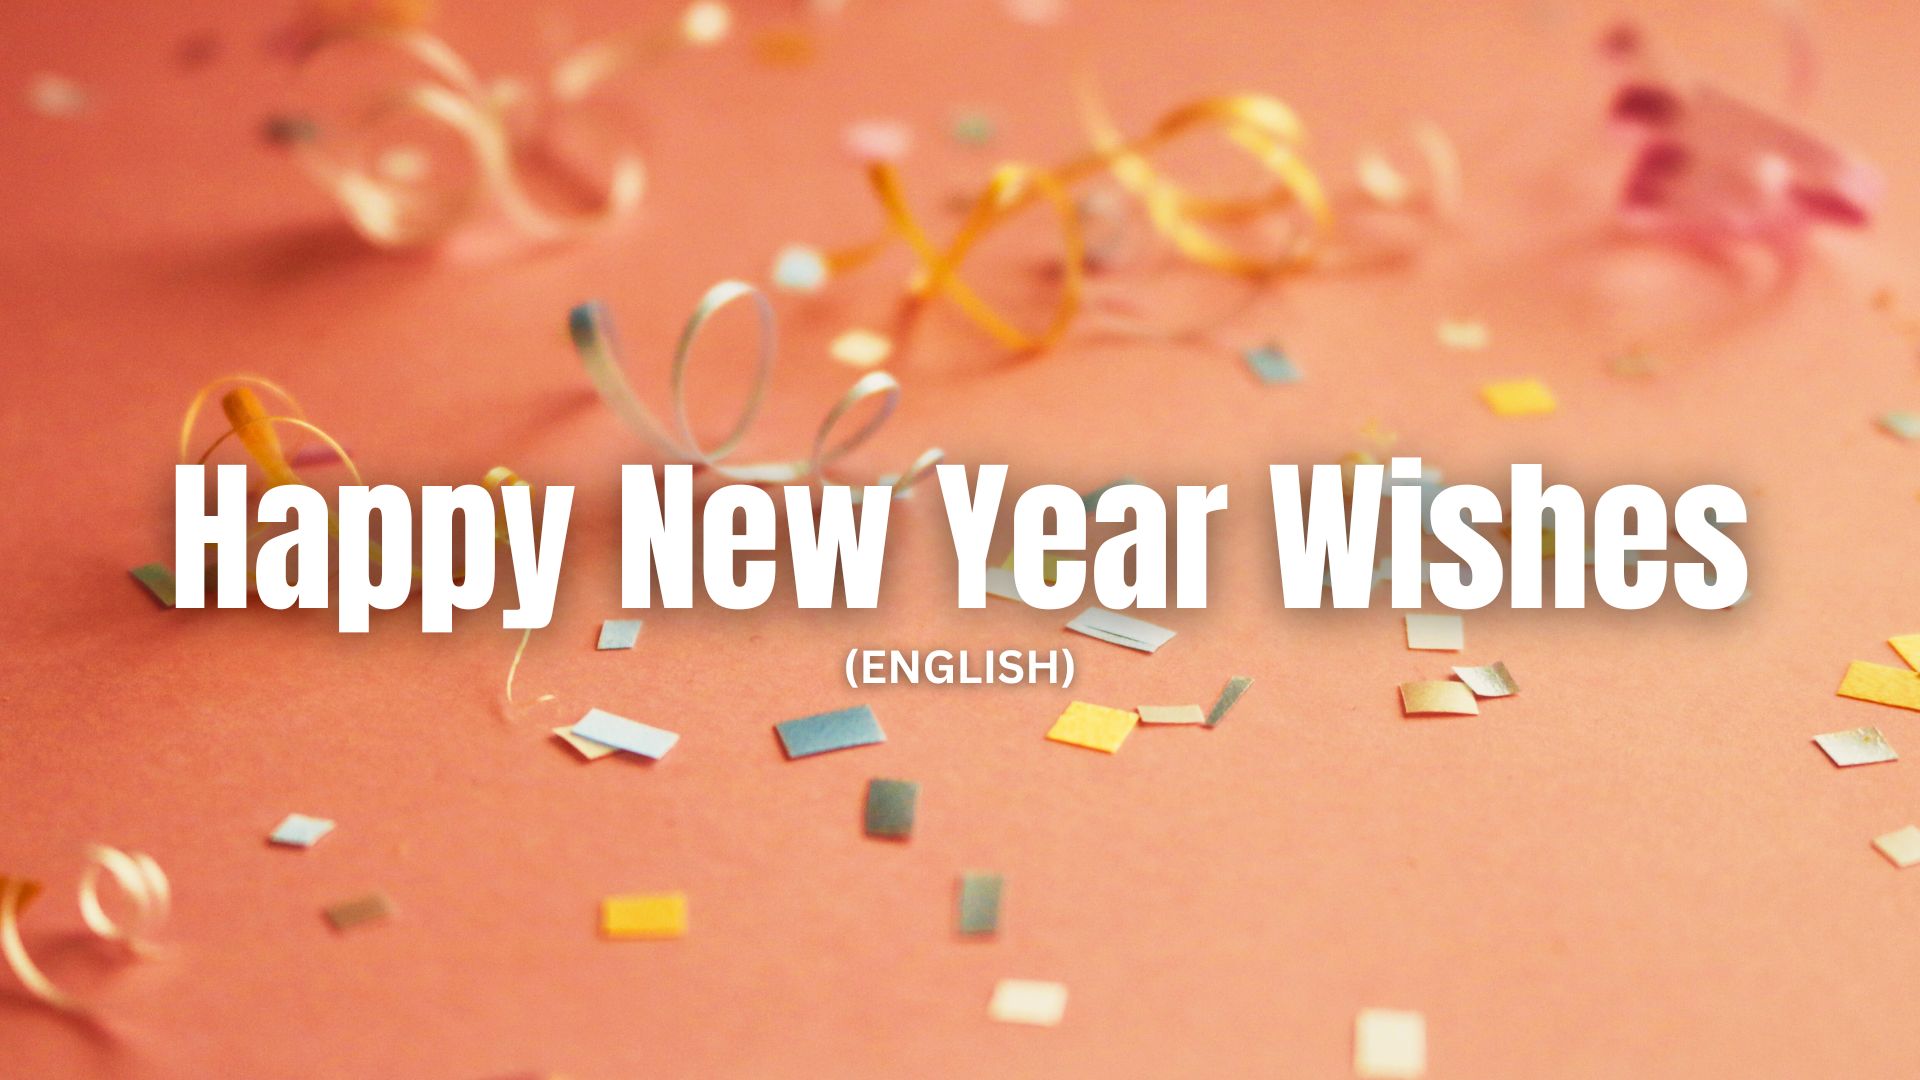 Happy New Year Wishes, Greetings, Messages in English